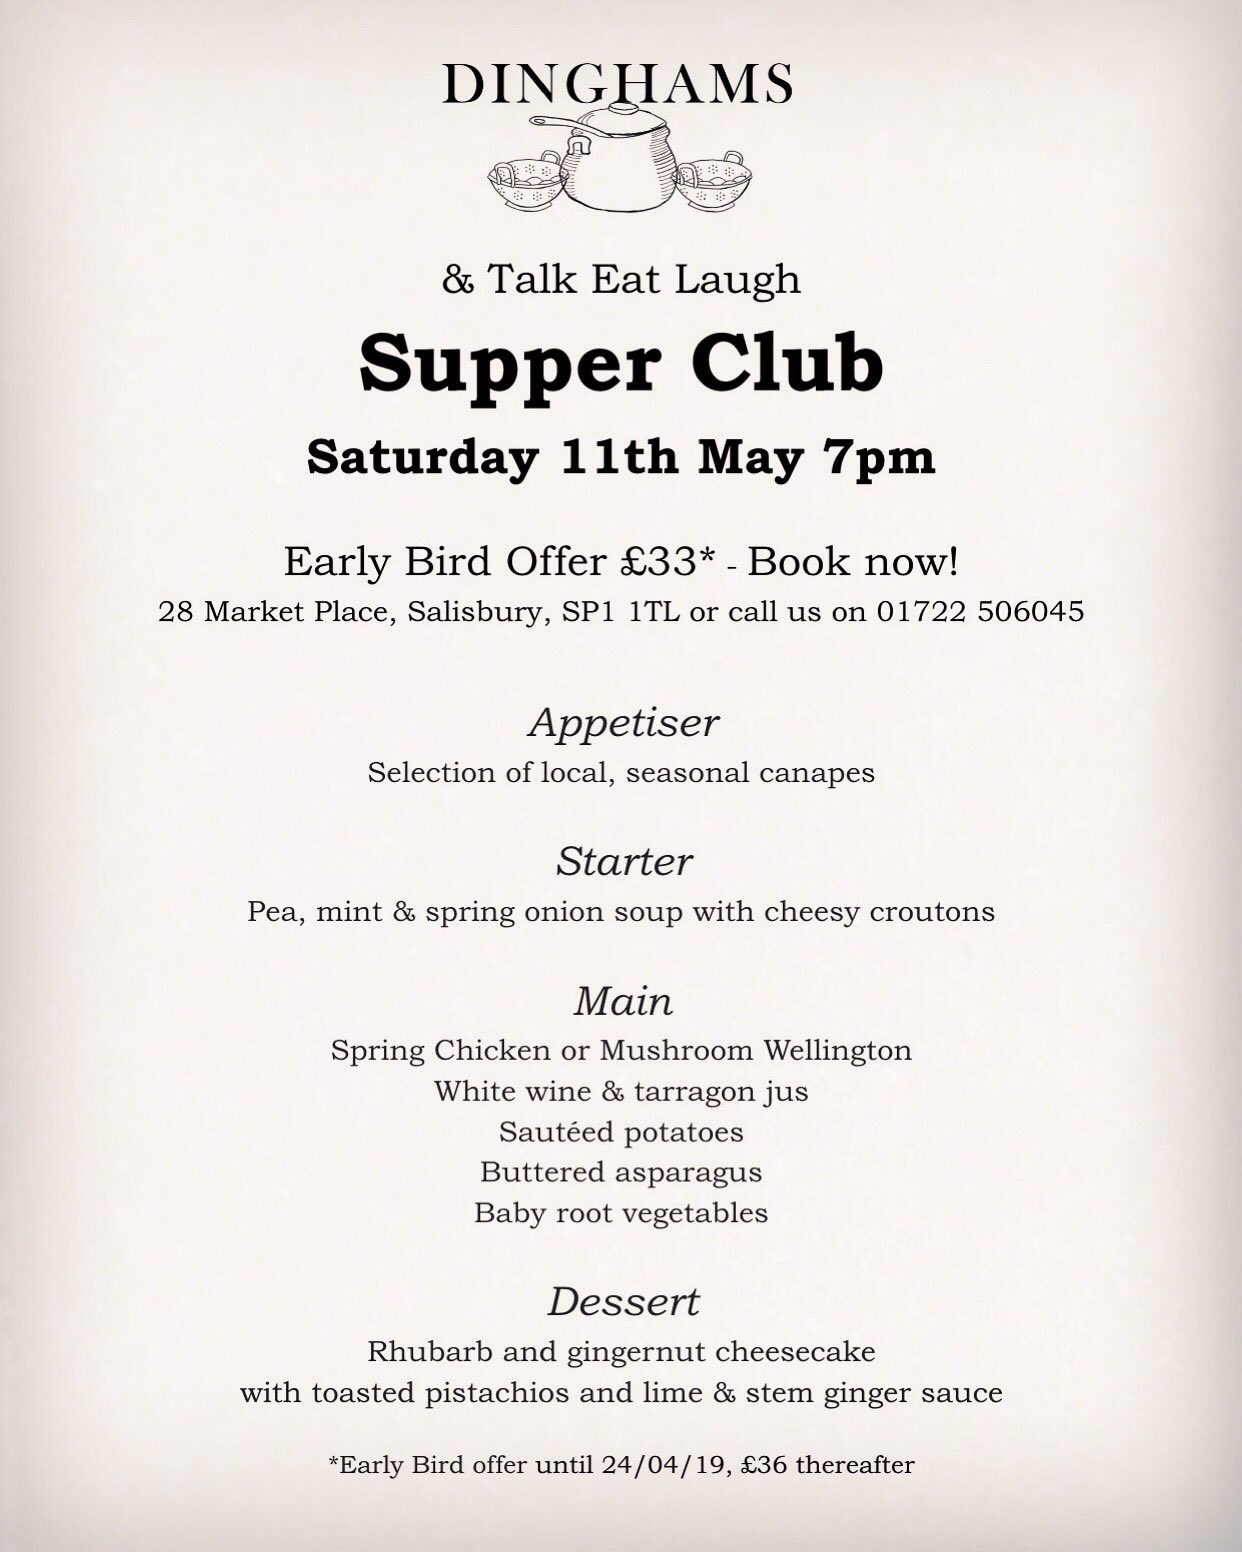 Supper Club with Dinghams, 11th May